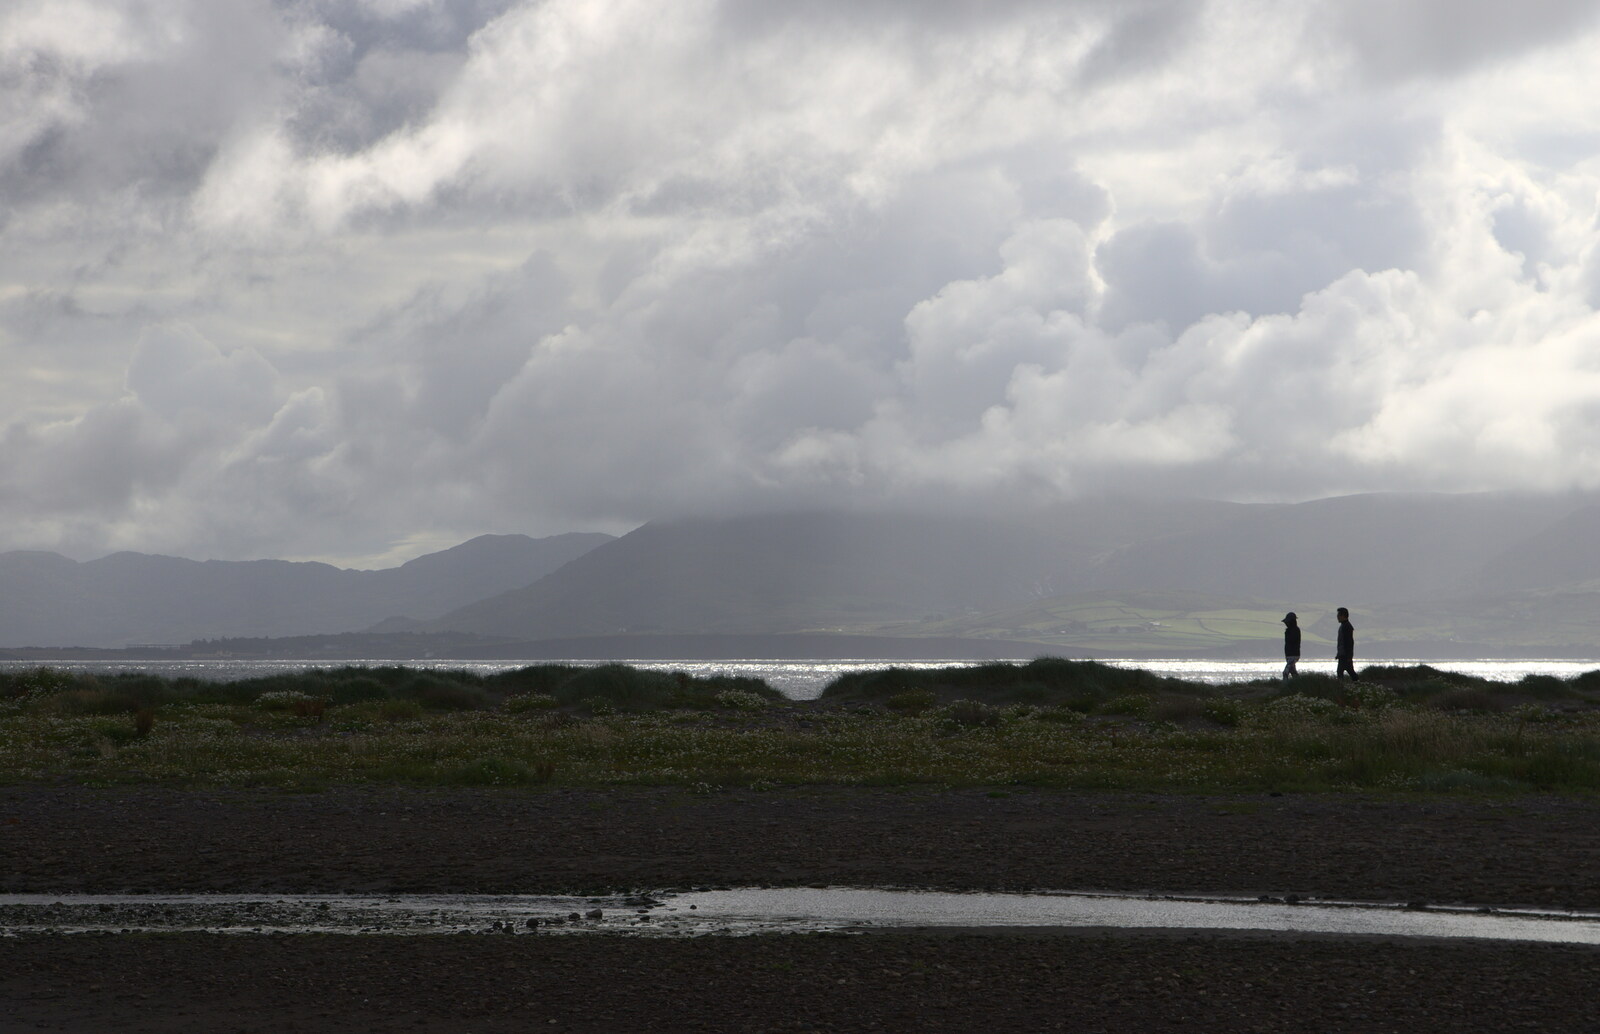 Two people walk on the spit from Baile an Sceilg to An tSnaidhme, Co. Kerry, Ireland - 31st July 2017